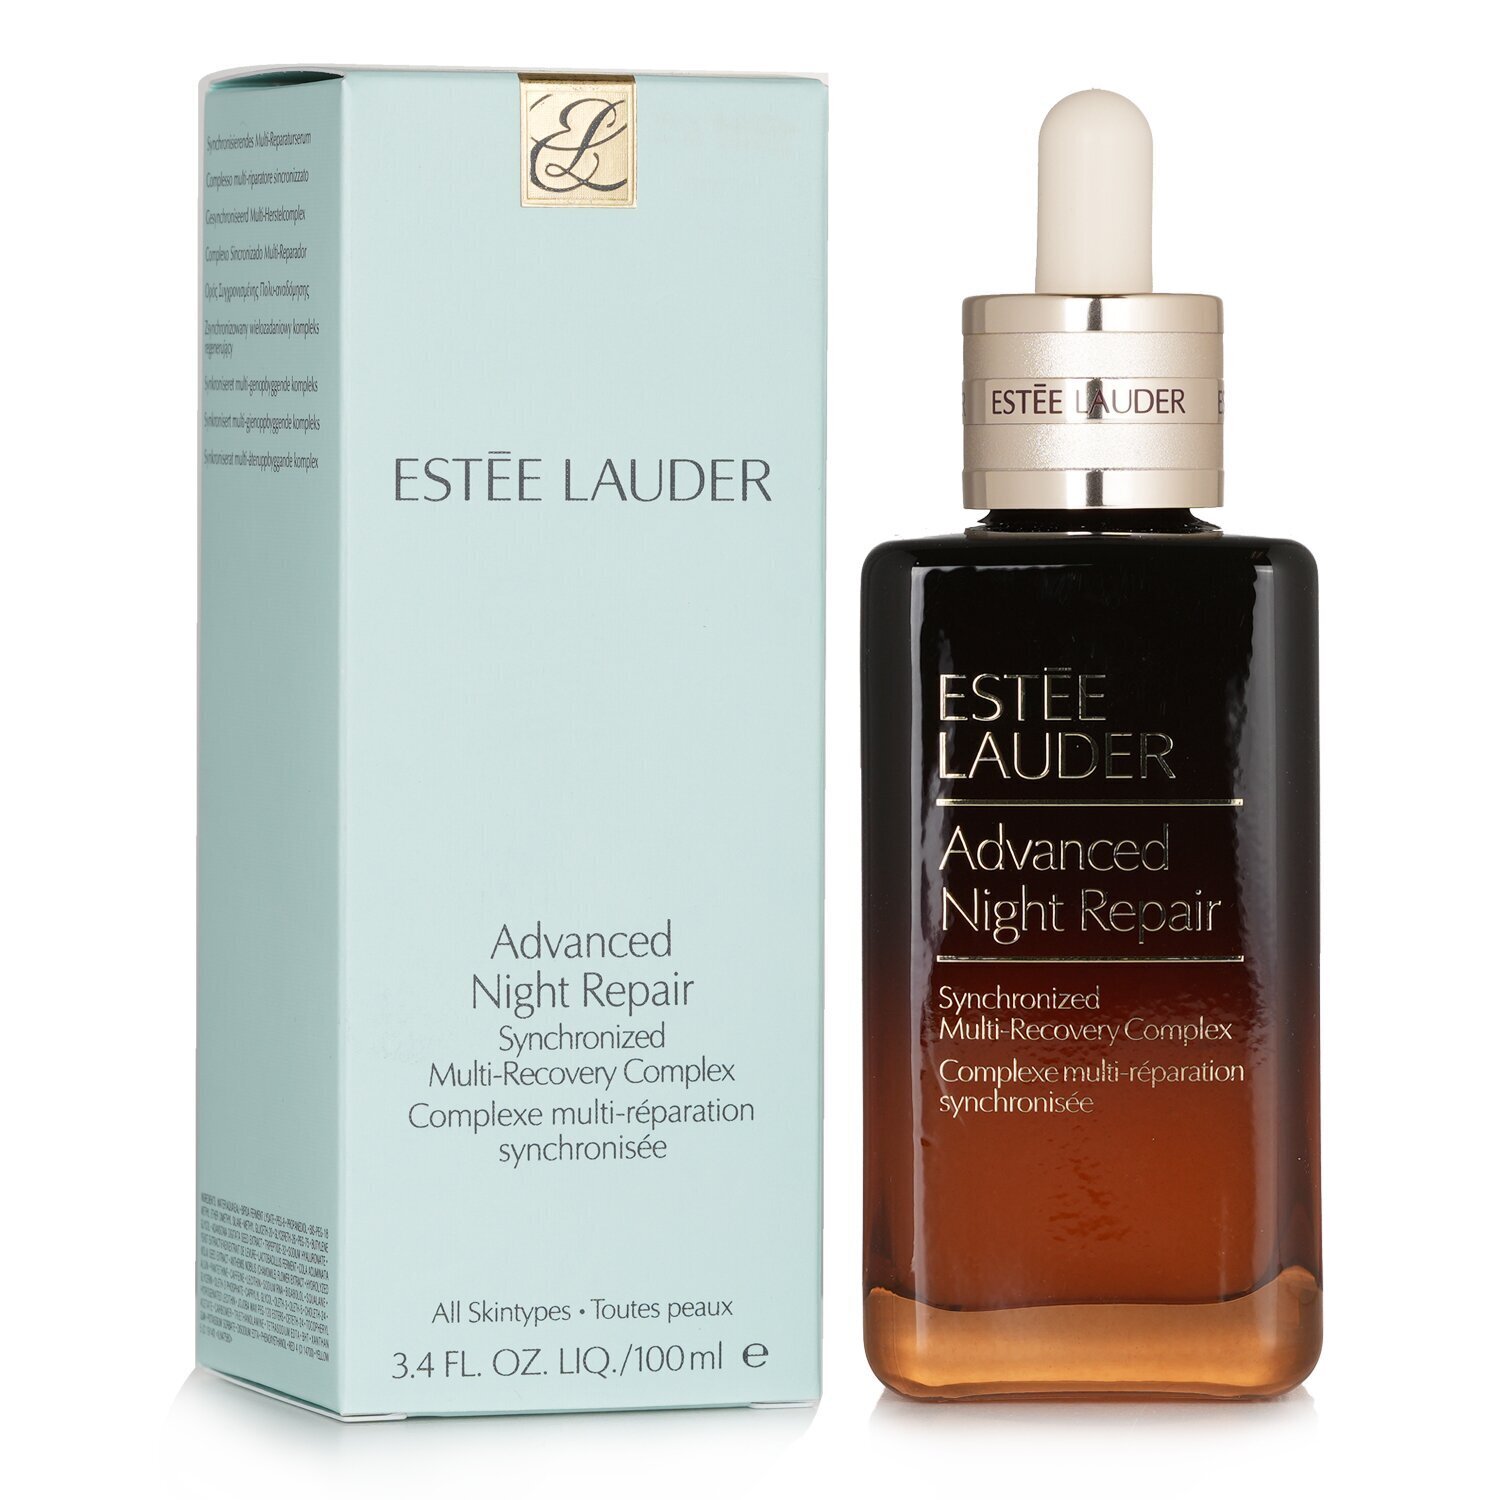 Estee Lauder Advanced Night Repair Synchronized Multi-Recovery Complex (With box from Seasonal Set) 100ml/3.4oz